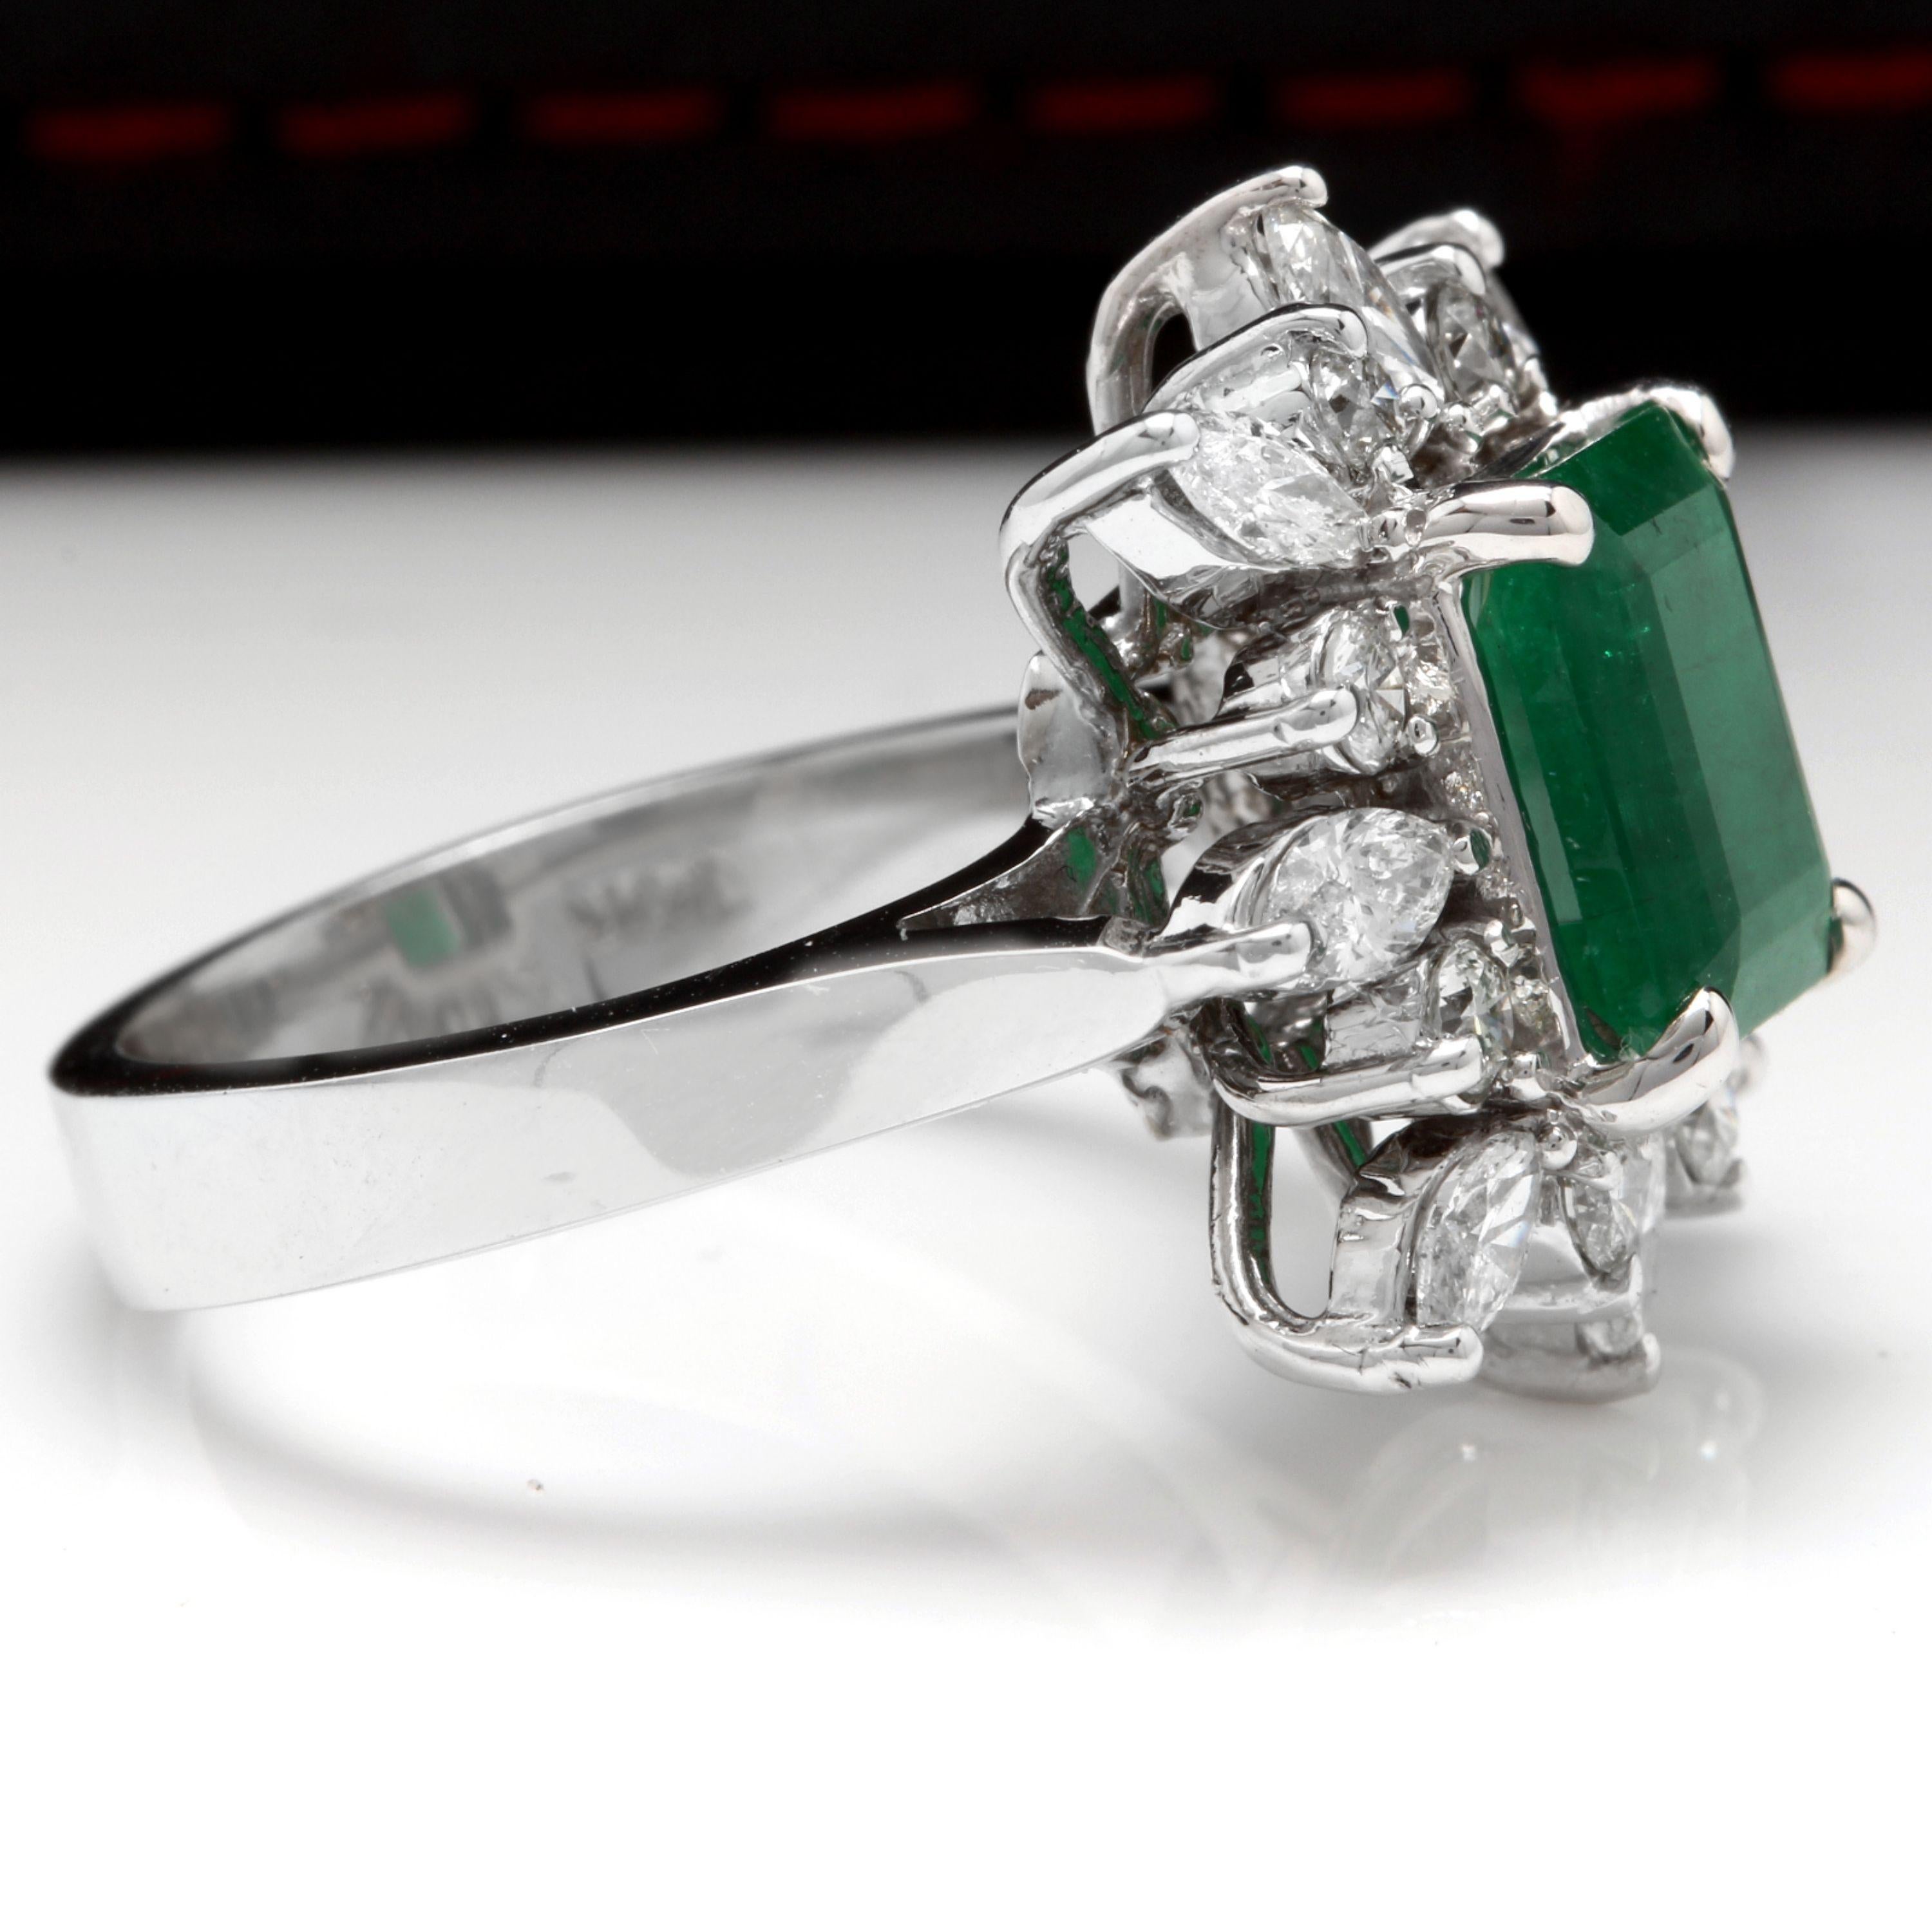 4.56 Carats Natural Emerald and Diamond 14K Solid White Gold Ring

Total Natural Green Emerald Weight is: Approx. 3.06 Carats (transparent)

Emerald Measures: Approx. 9.11 x 7.66mm

Emerald Treatment: Oiling

Natural Round & Marquise Diamonds